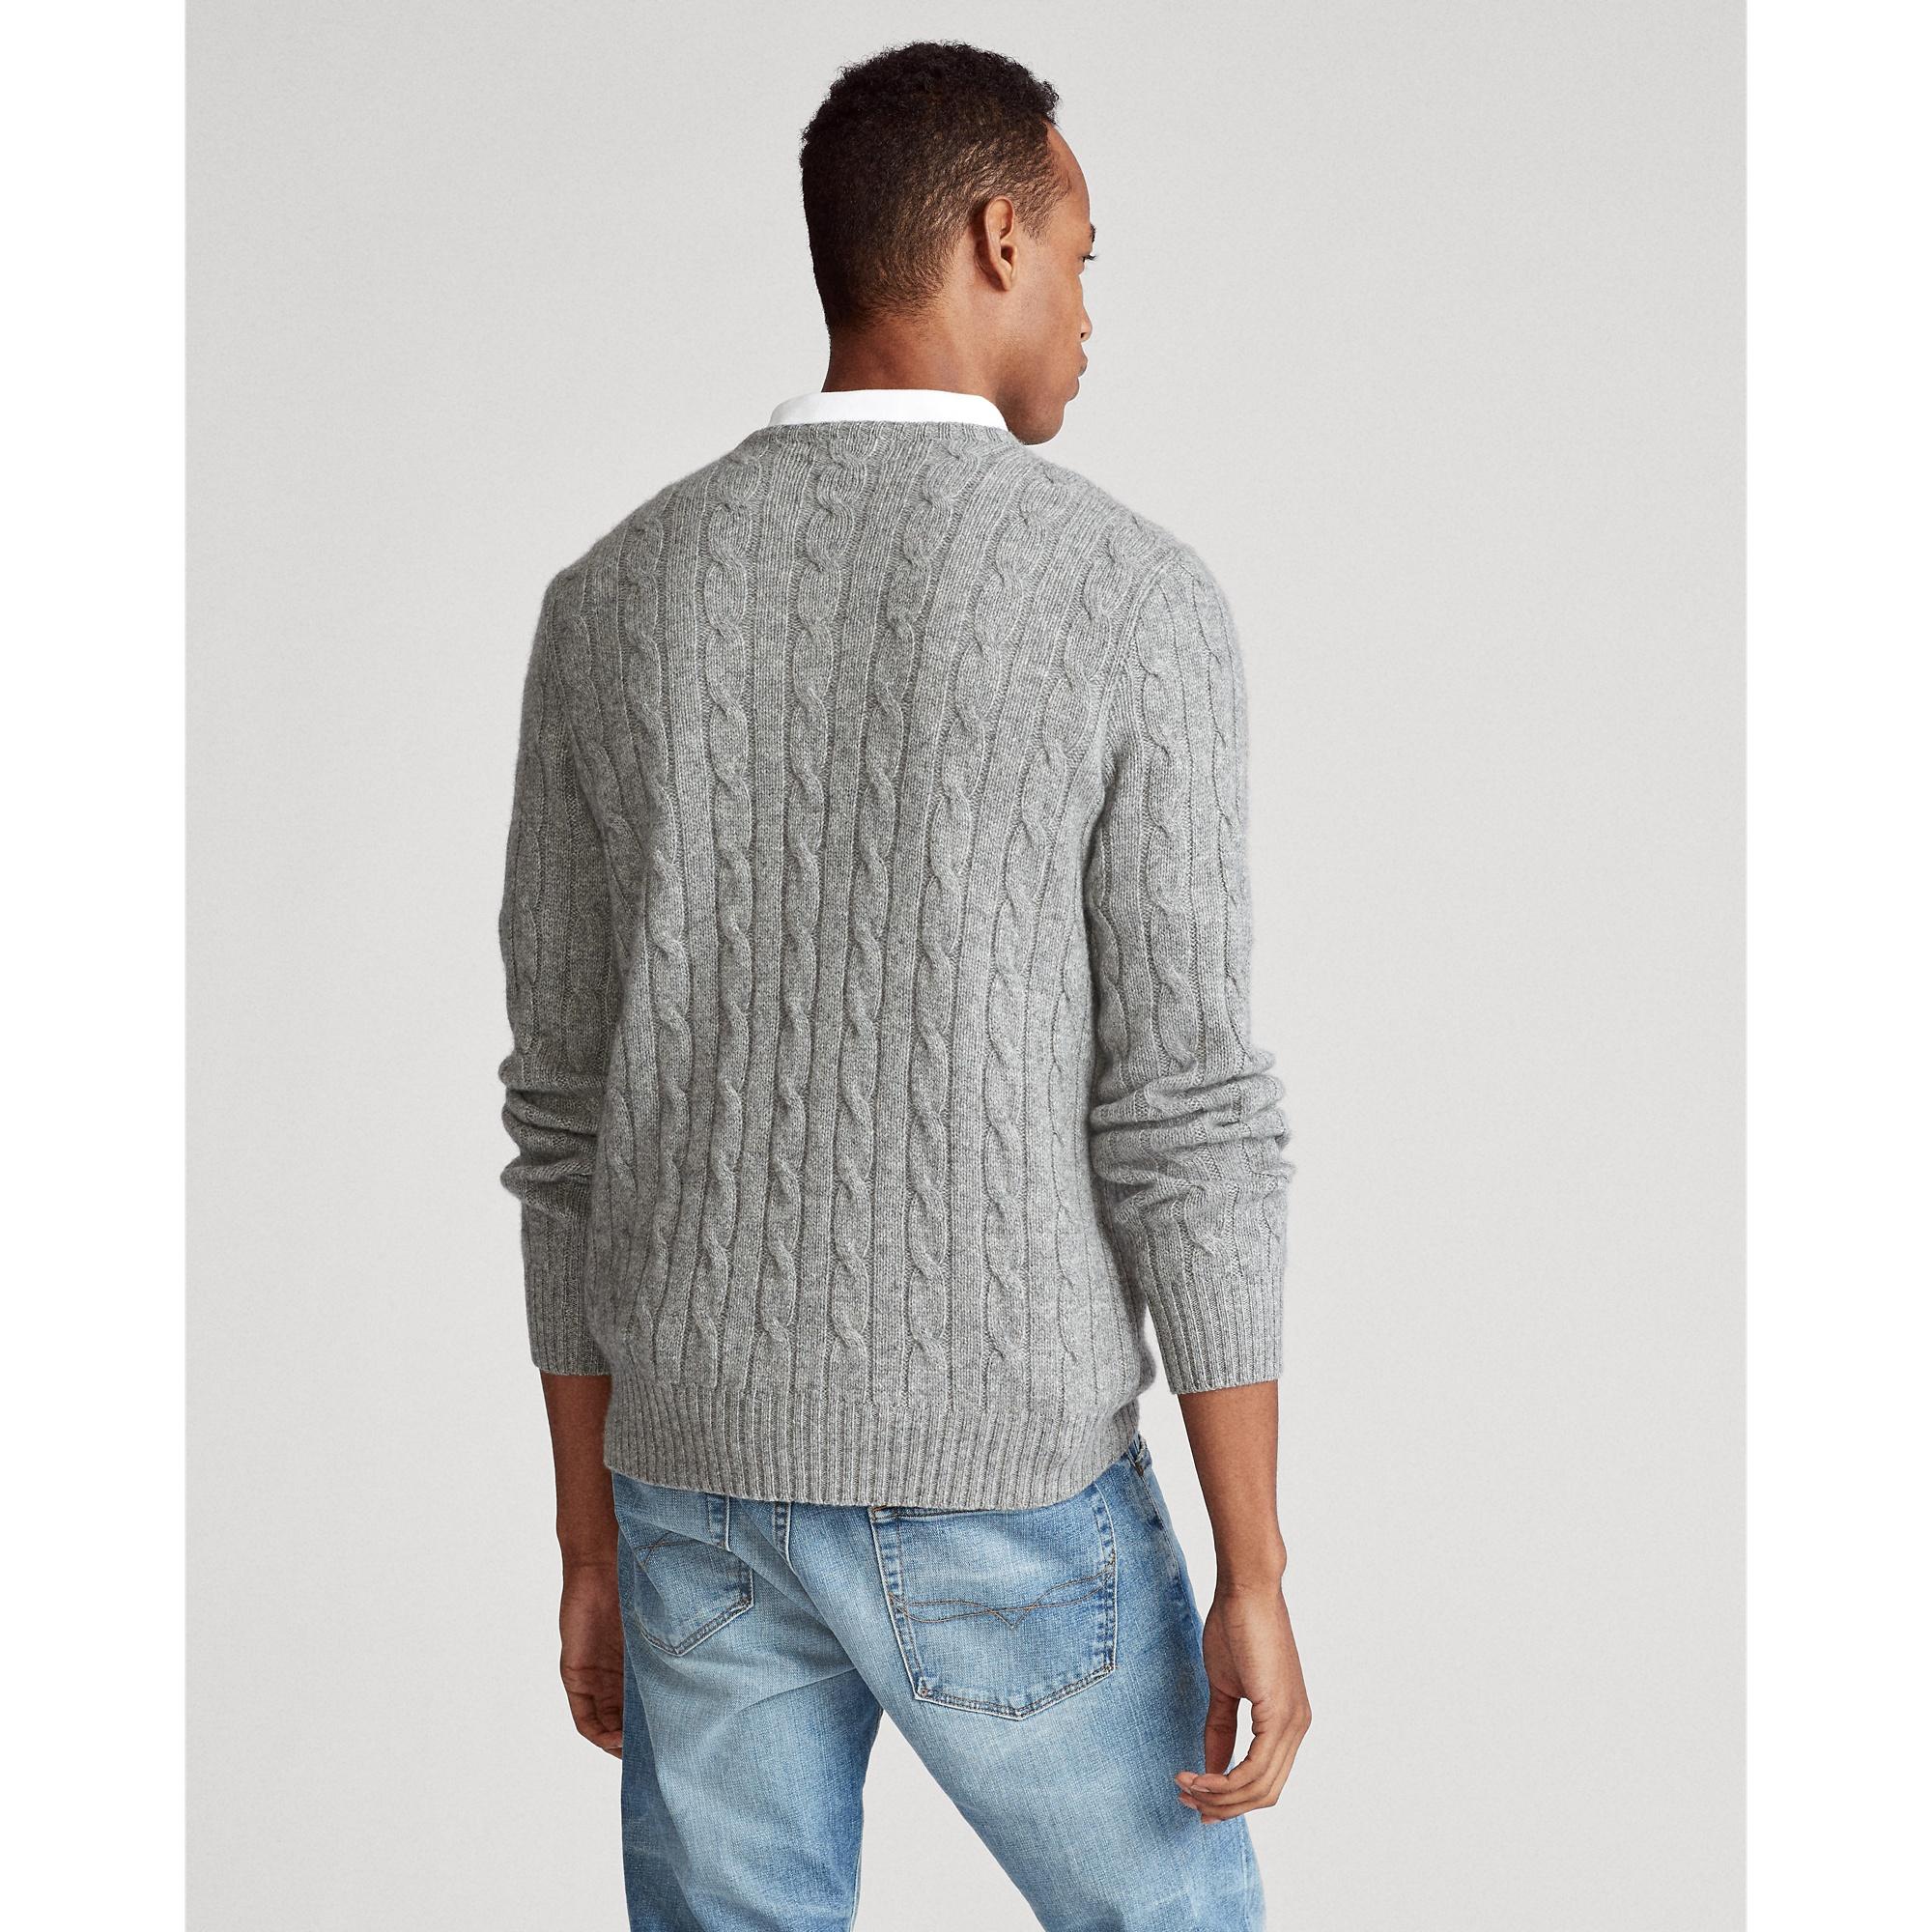 Polo Ralph Lauren Cable-knit Cashmere Jumper in Gray for Men - Lyst